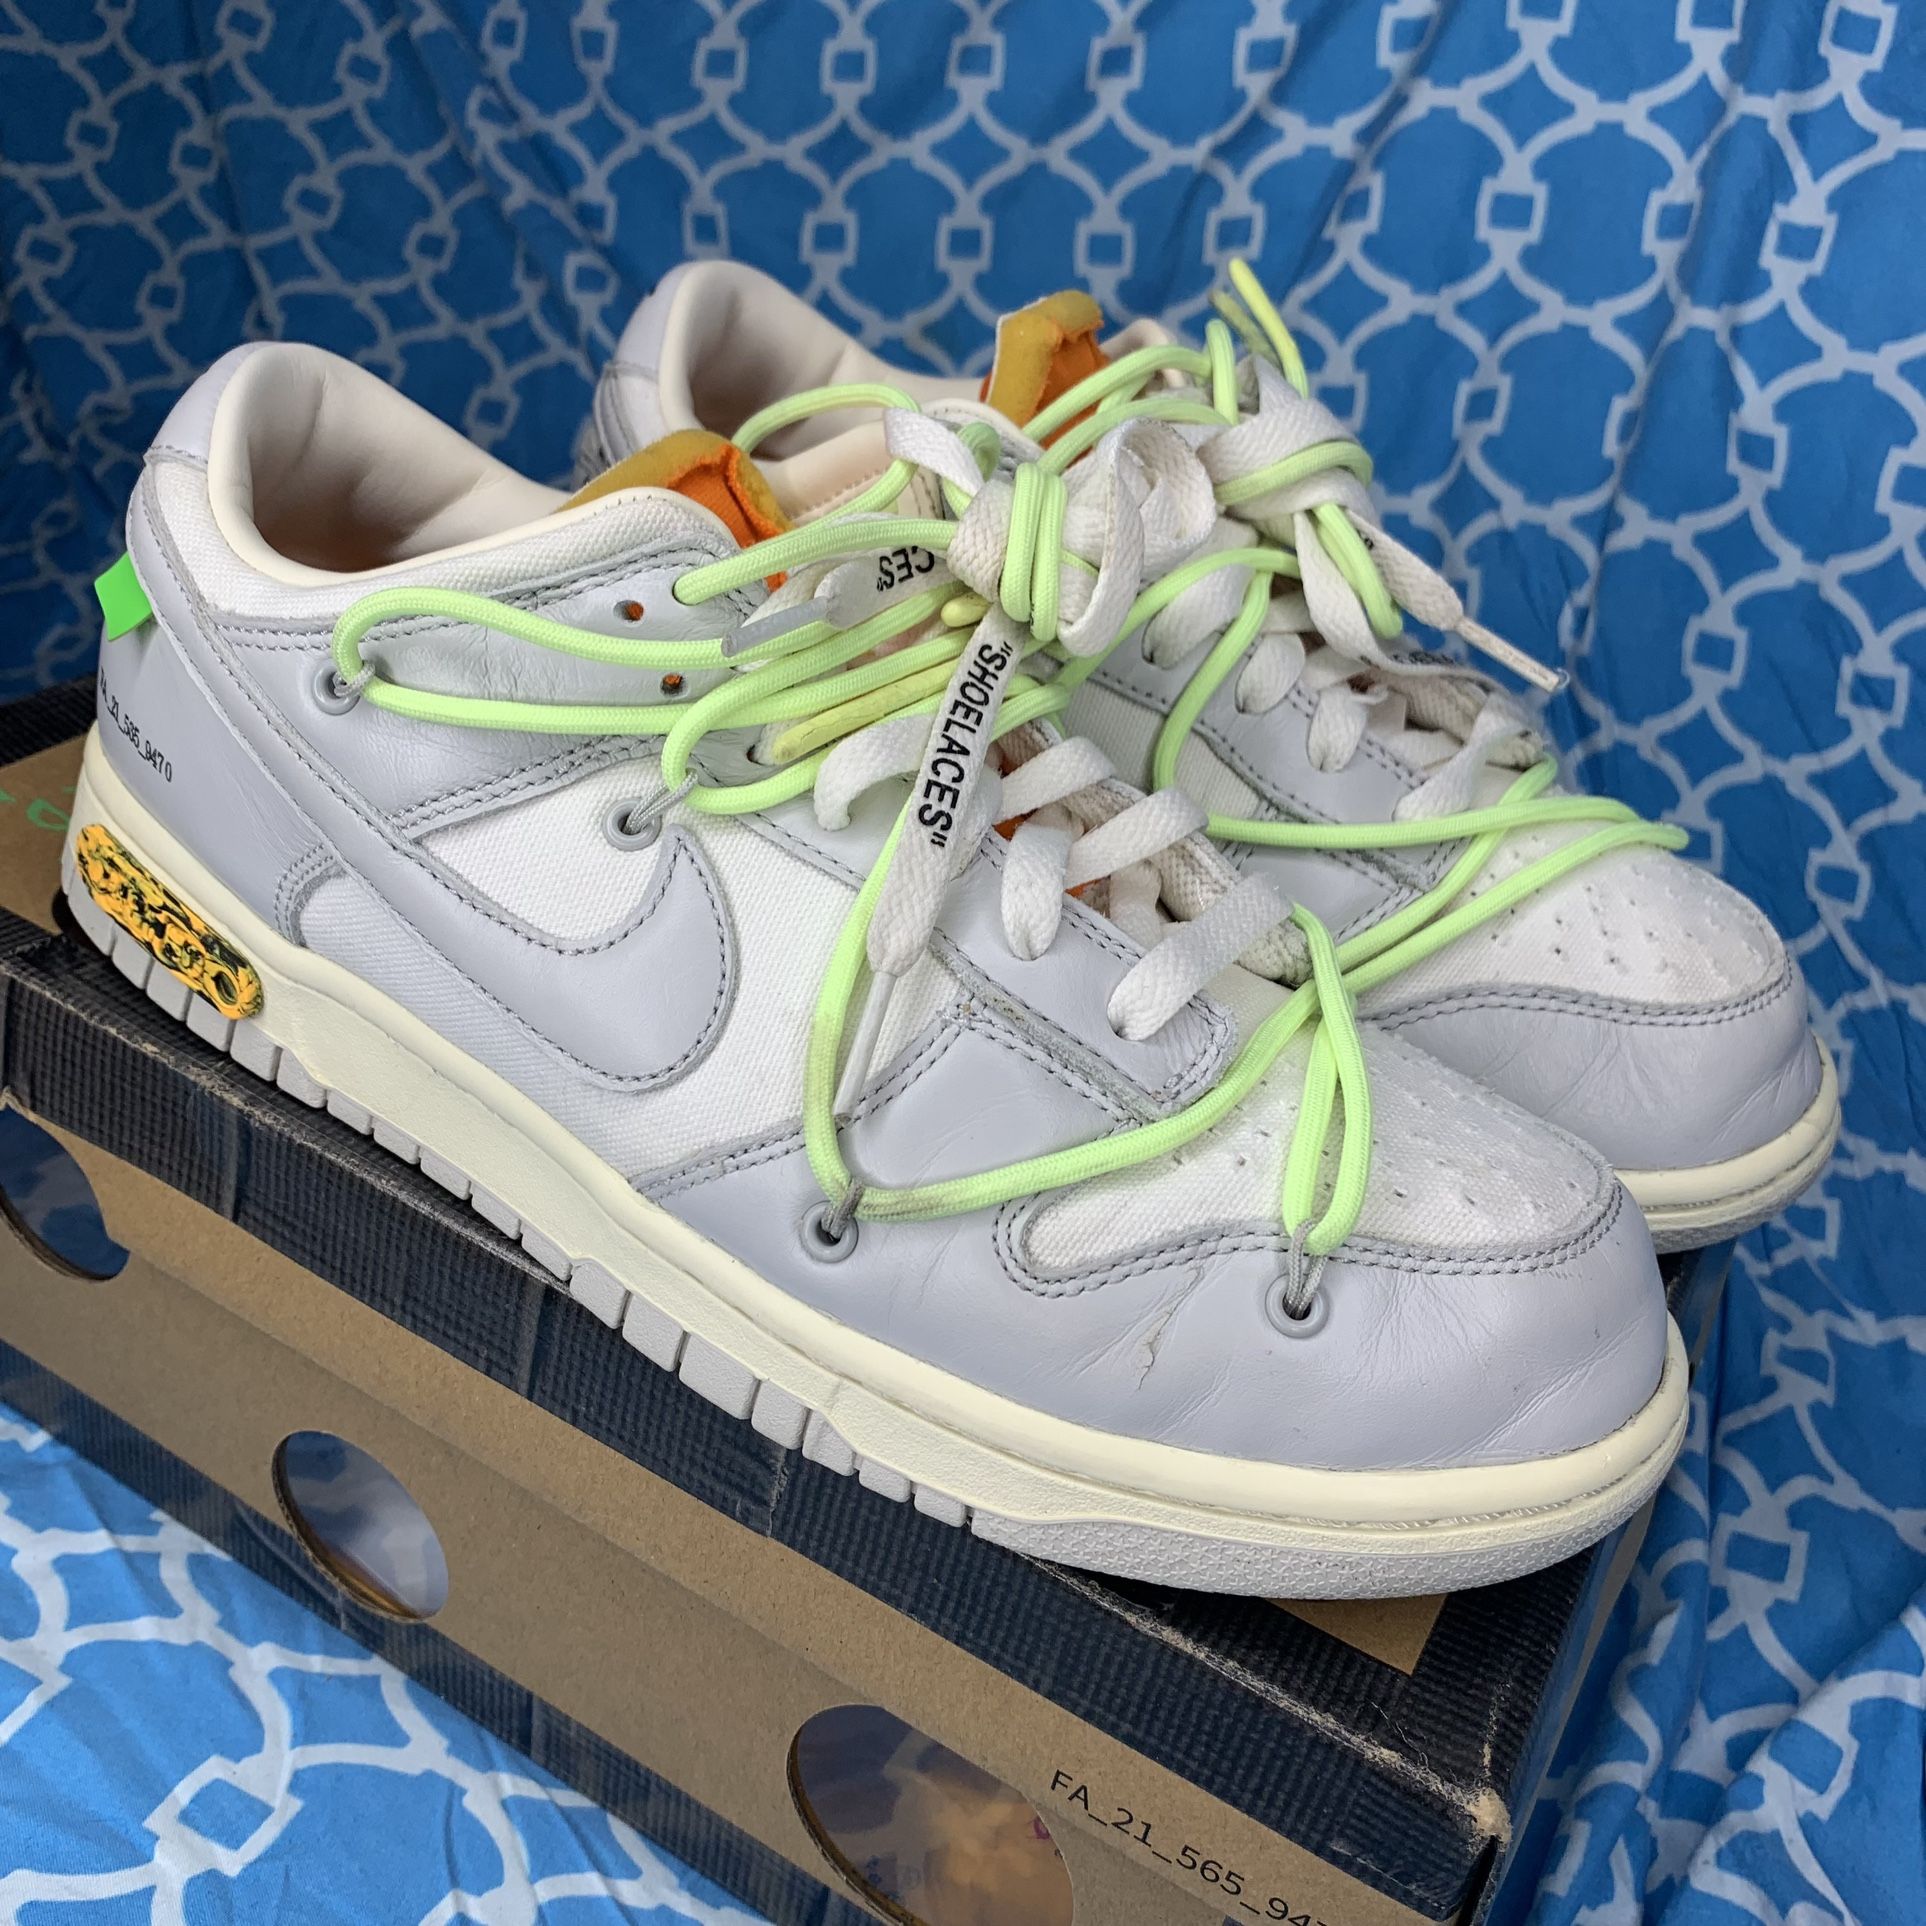 Nike Men’s size 8.5 Dunk low off white lot 43 of 50 white grey green sneakers